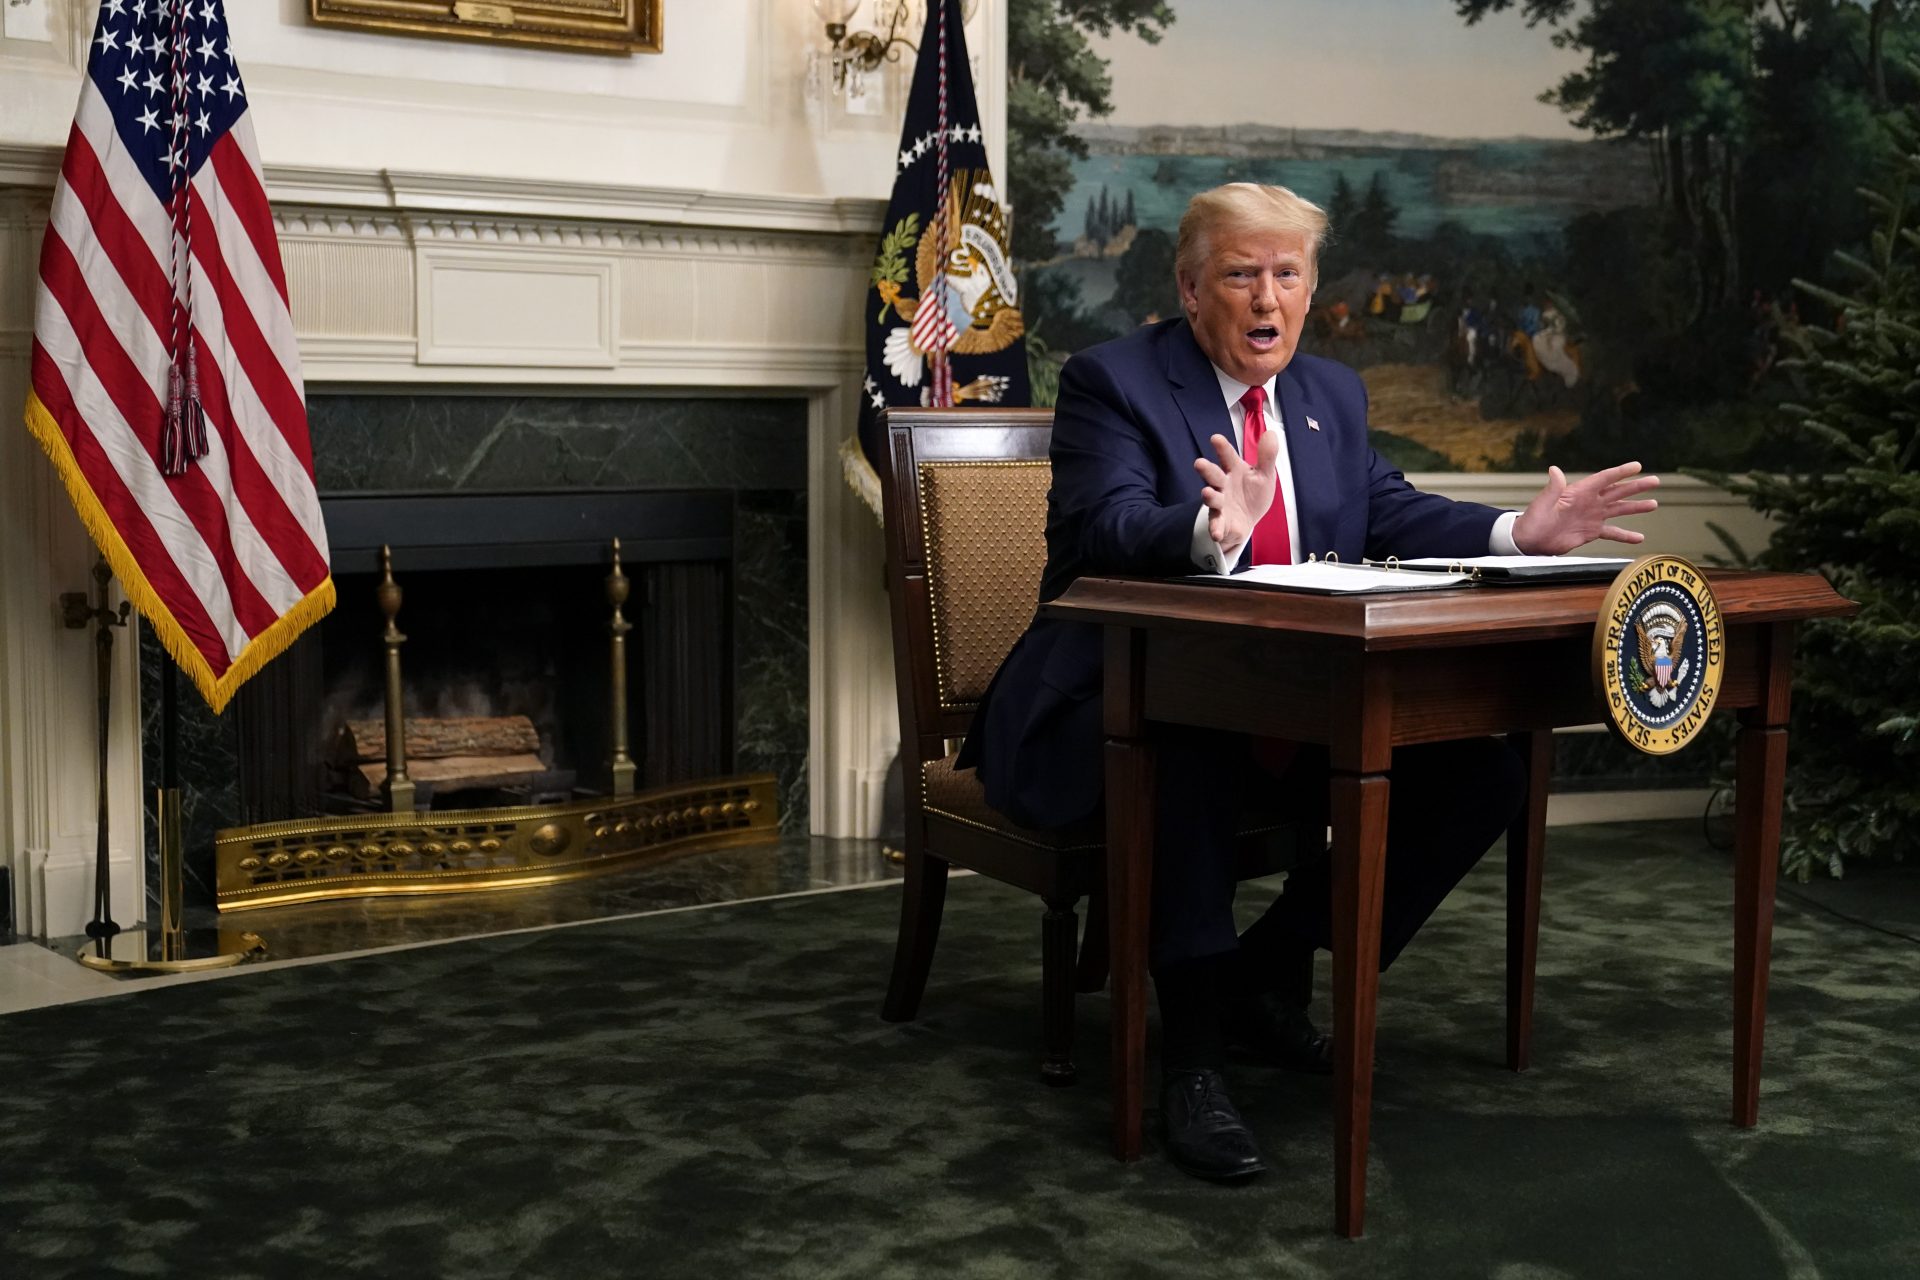 President Donald Trump speaks with reporters after participating in a video teleconference call with members of the military on Thanksgiving, Thursday, Nov. 26, 2020, at the White House in Washington.